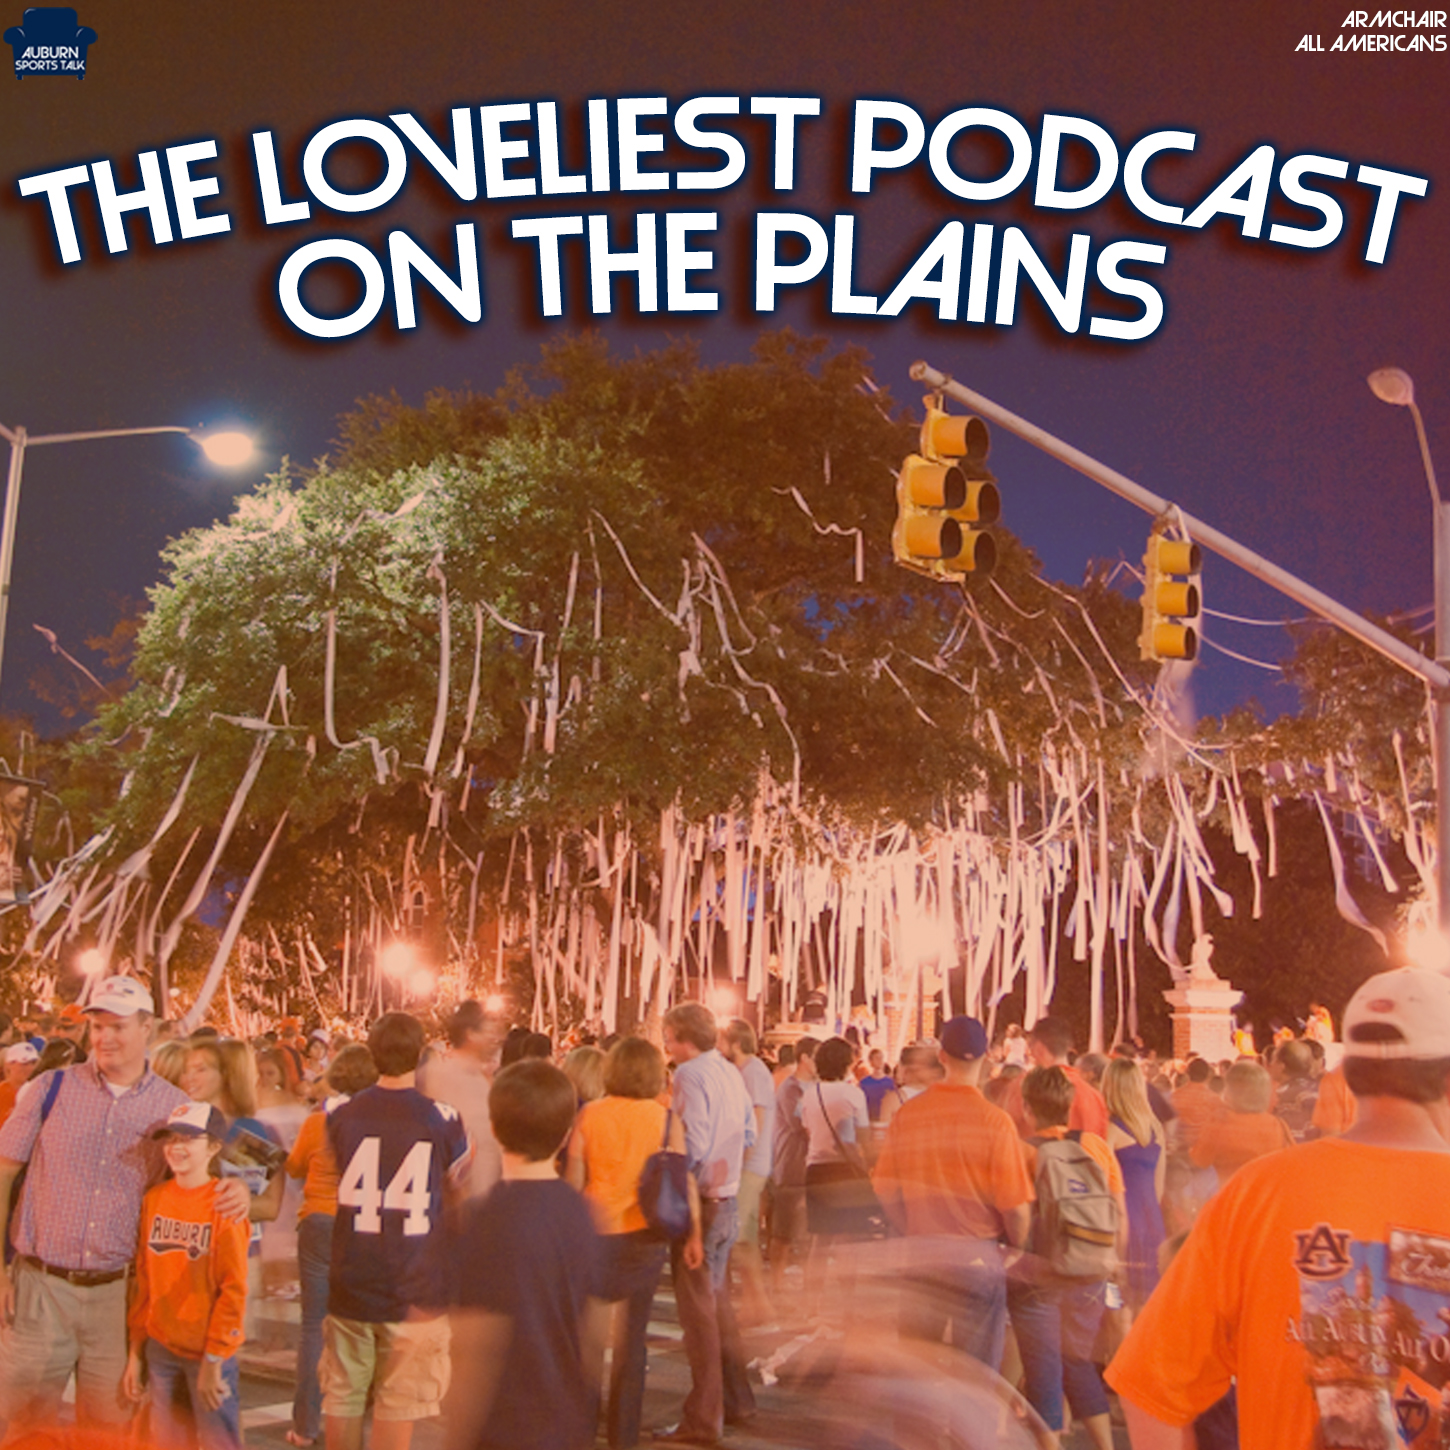 The Loveliest Podcast on the Plains